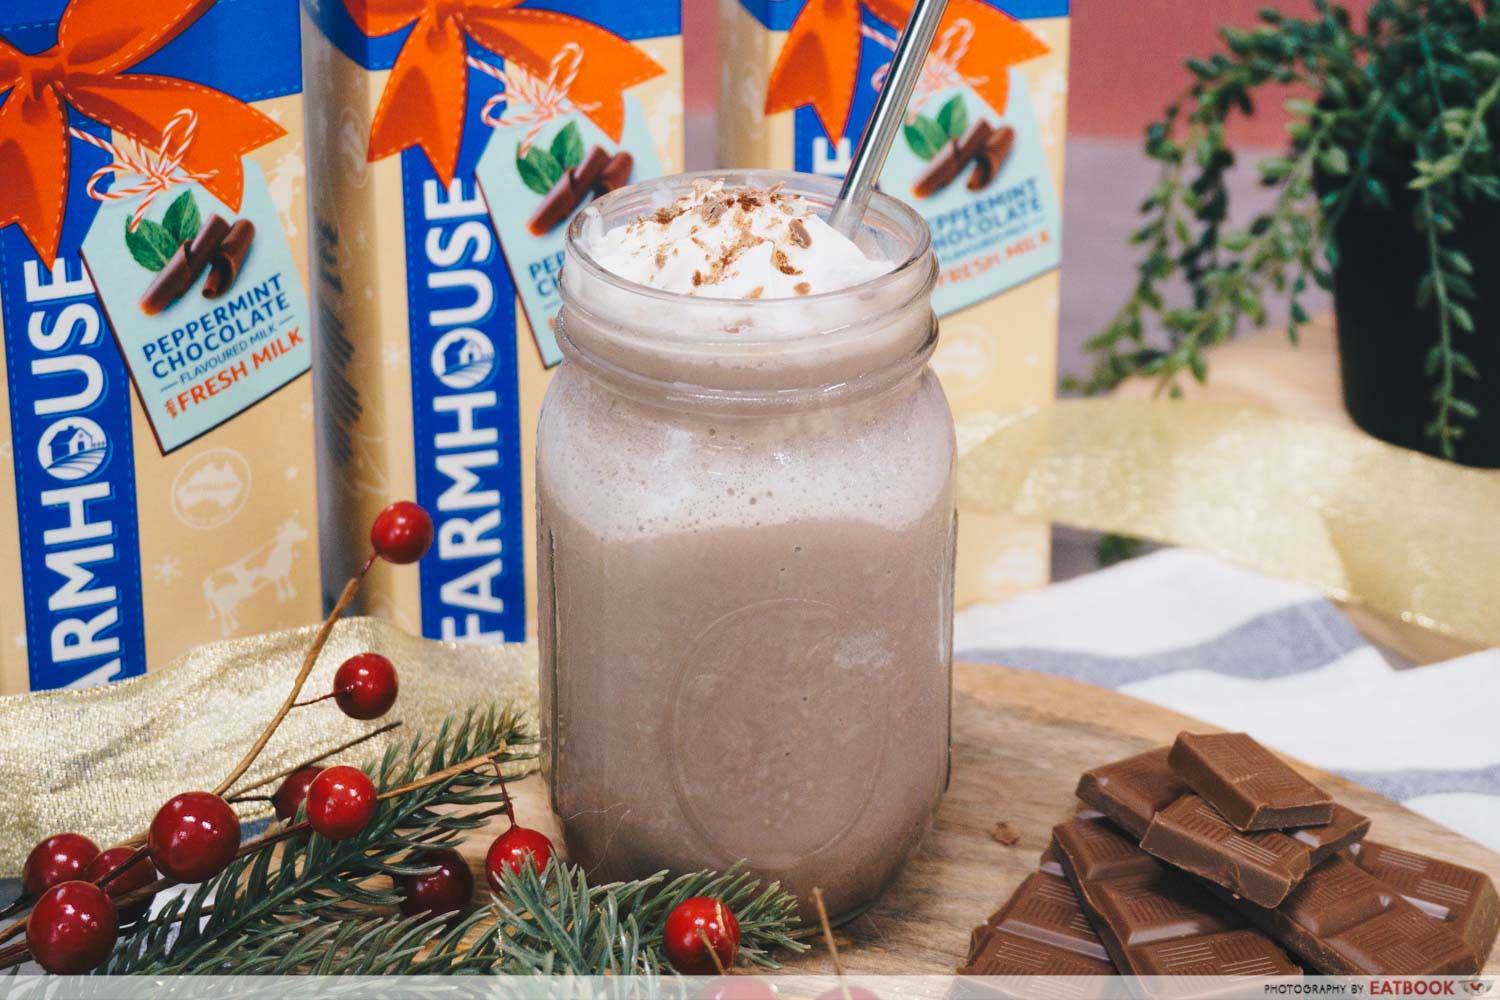 Farmhouse S Limited Edition Peppermint Chocolate Fresh Milk Lets You Diy Your Own Christmas Frappe Eatbook Sg New Singapore Restaurant And Street Food Ideas Recommendations